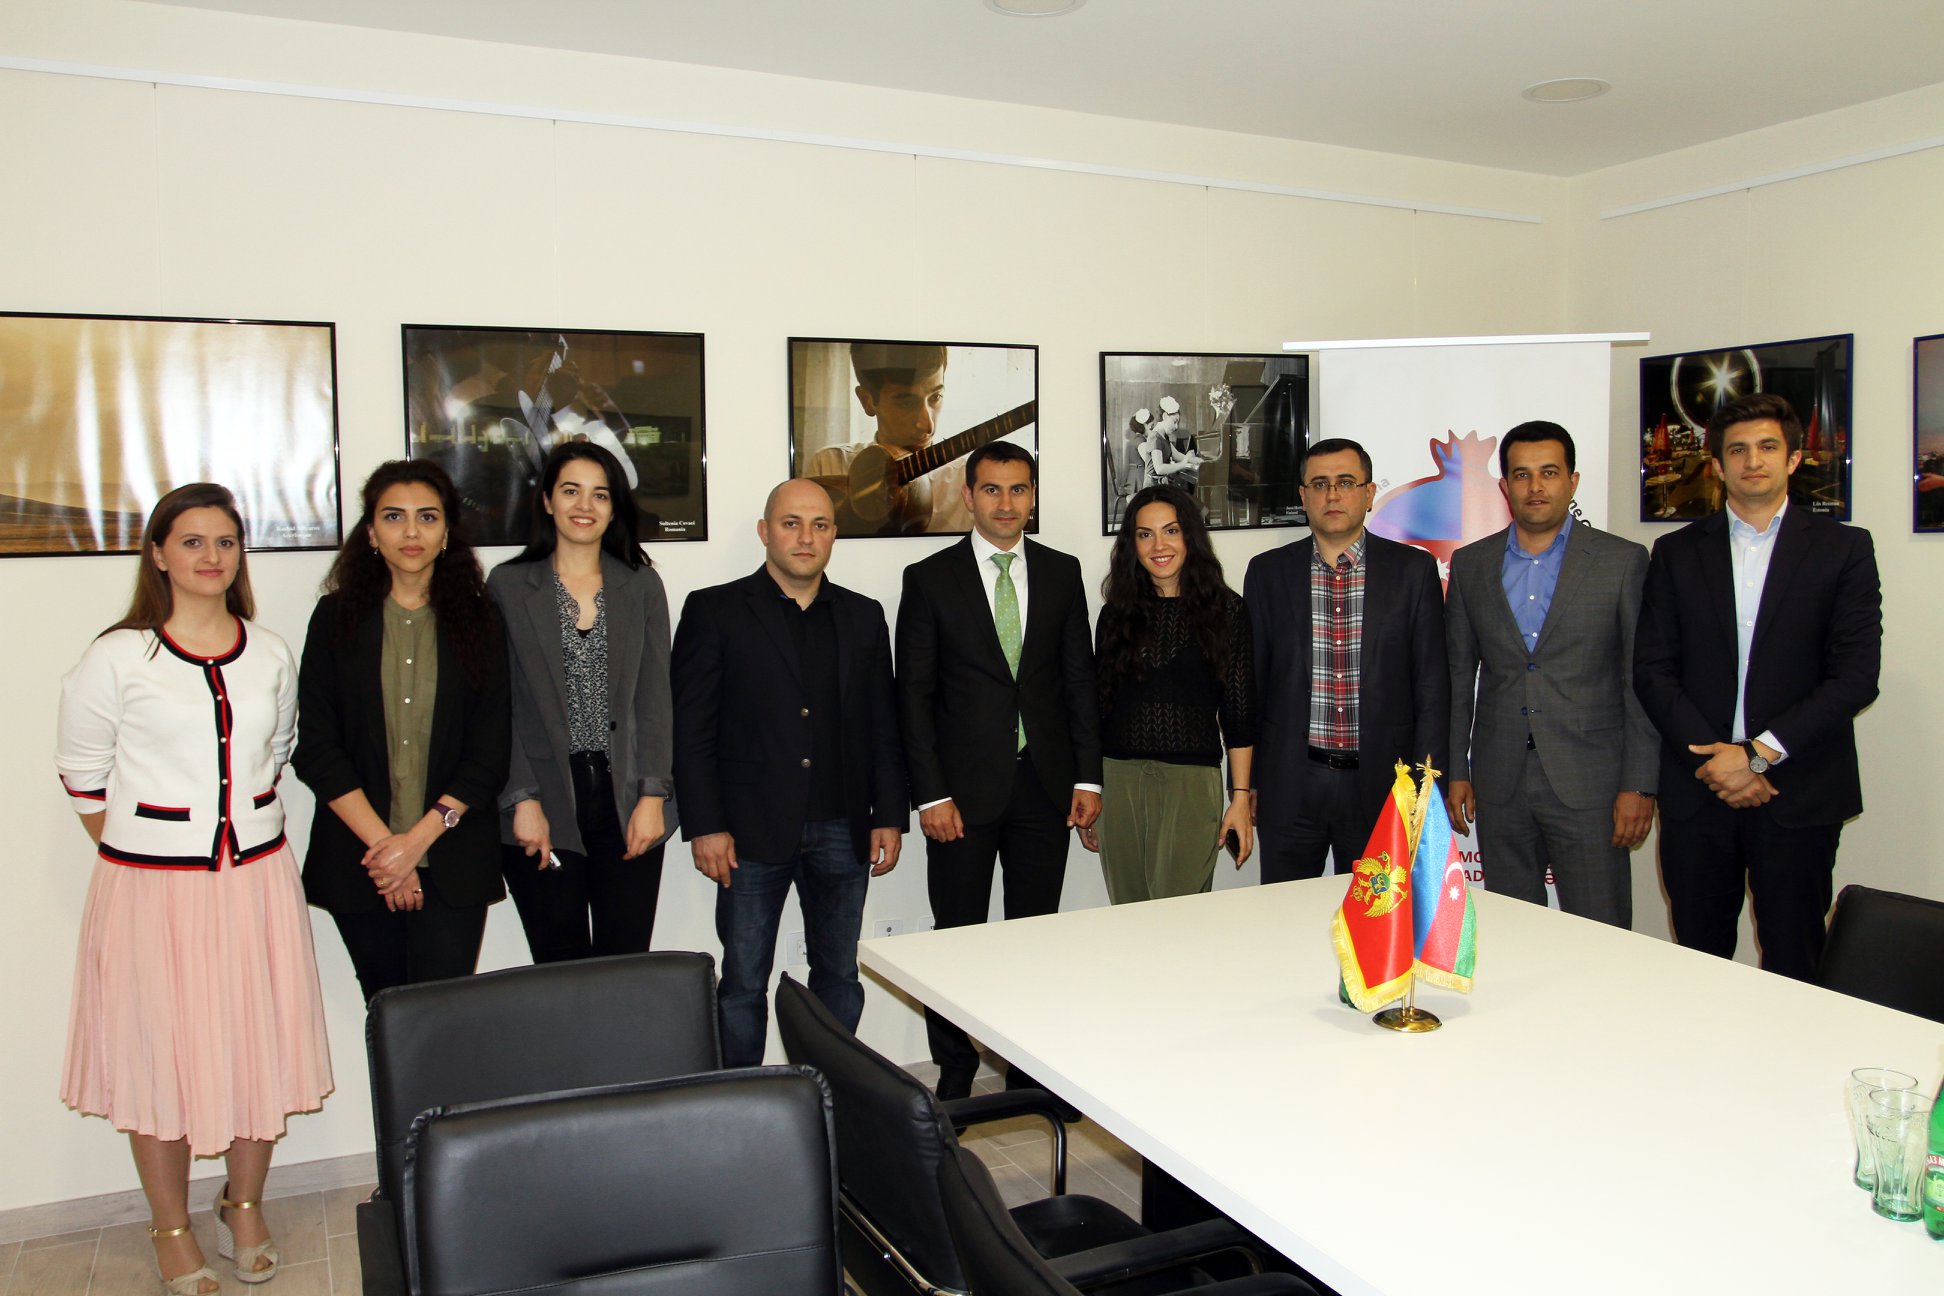 Representative of the Azerbaijan on the "Eurovision Song Contest" visited the Center - 2018 